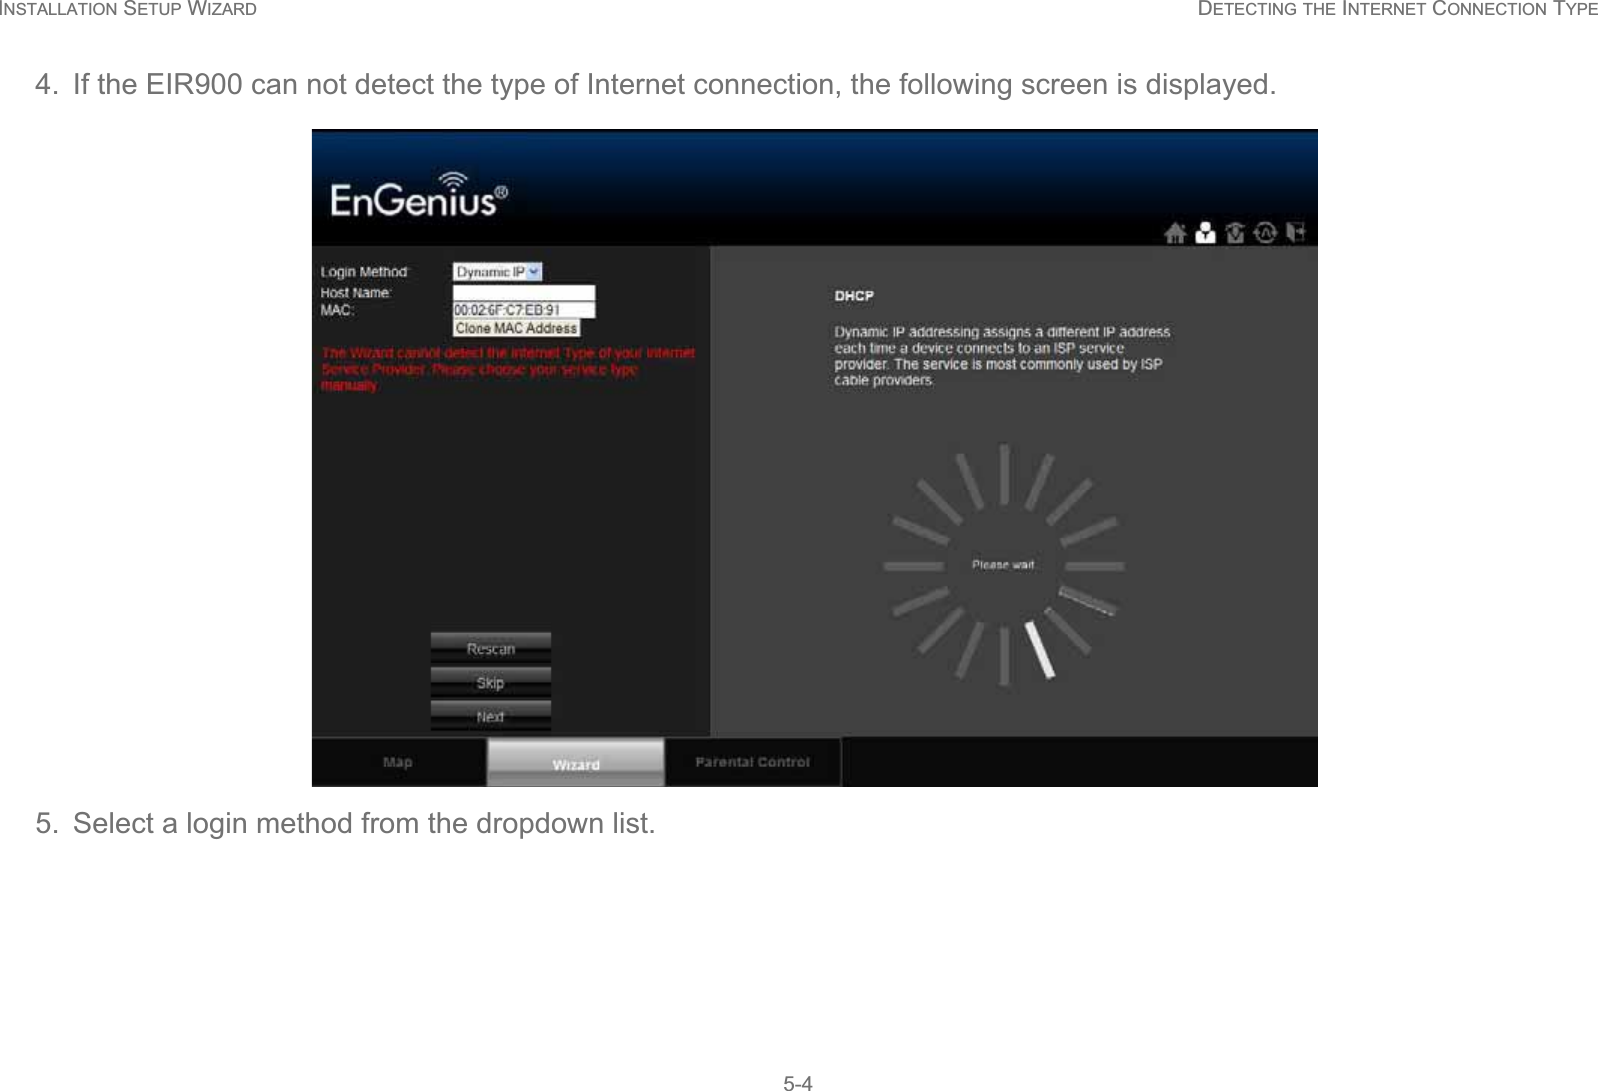 INSTALLATION SETUP WIZARD DETECTING THE INTERNET CONNECTION TYPE5-44. If the EIR900 can not detect the type of Internet connection, the following screen is displayed.5. Select a login method from the dropdown list.